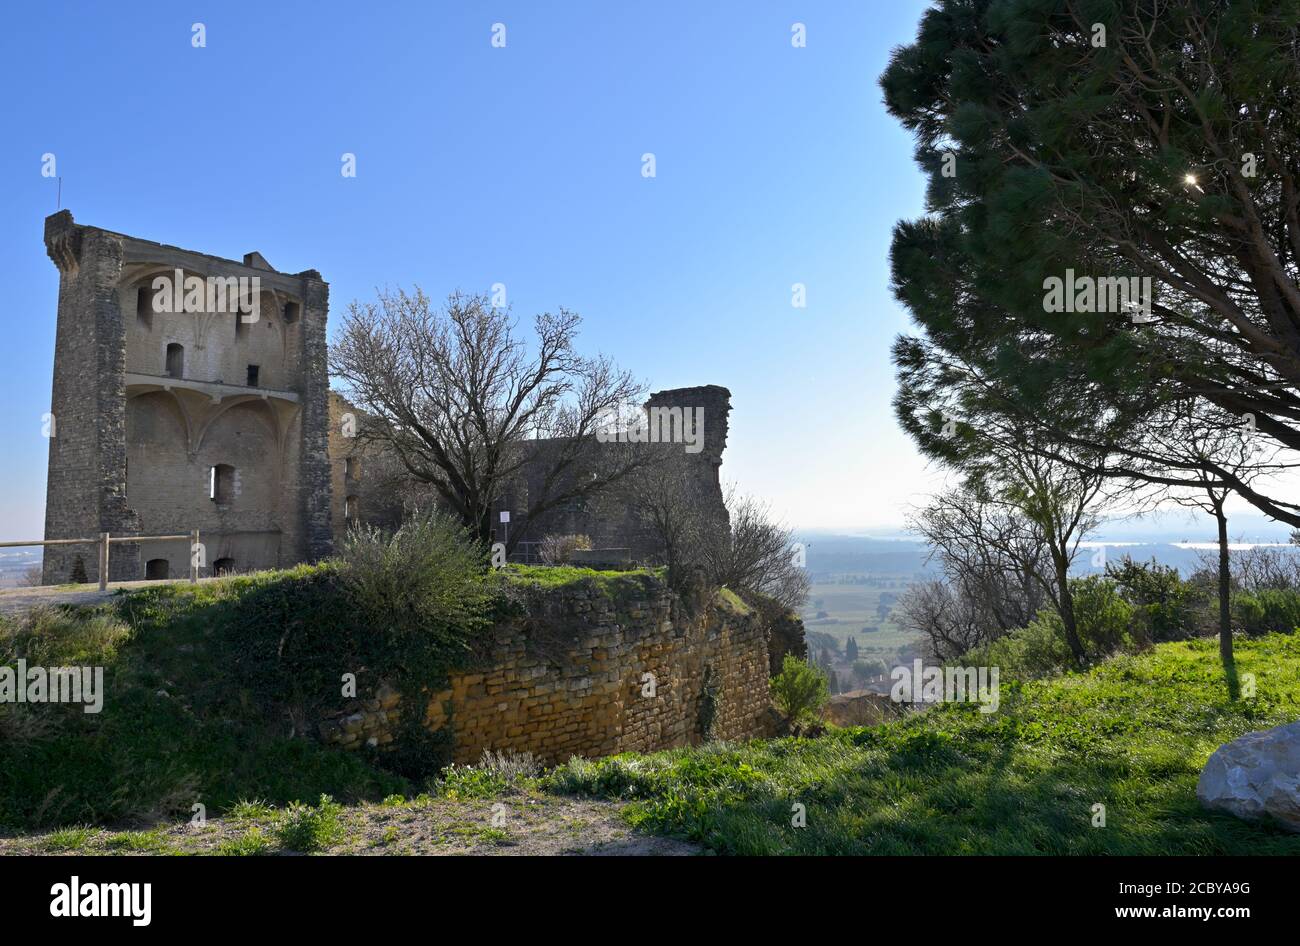 The castle ruins of Châteauneuf-du-Pape above the Rhone valley, Provence FR Stock Photo